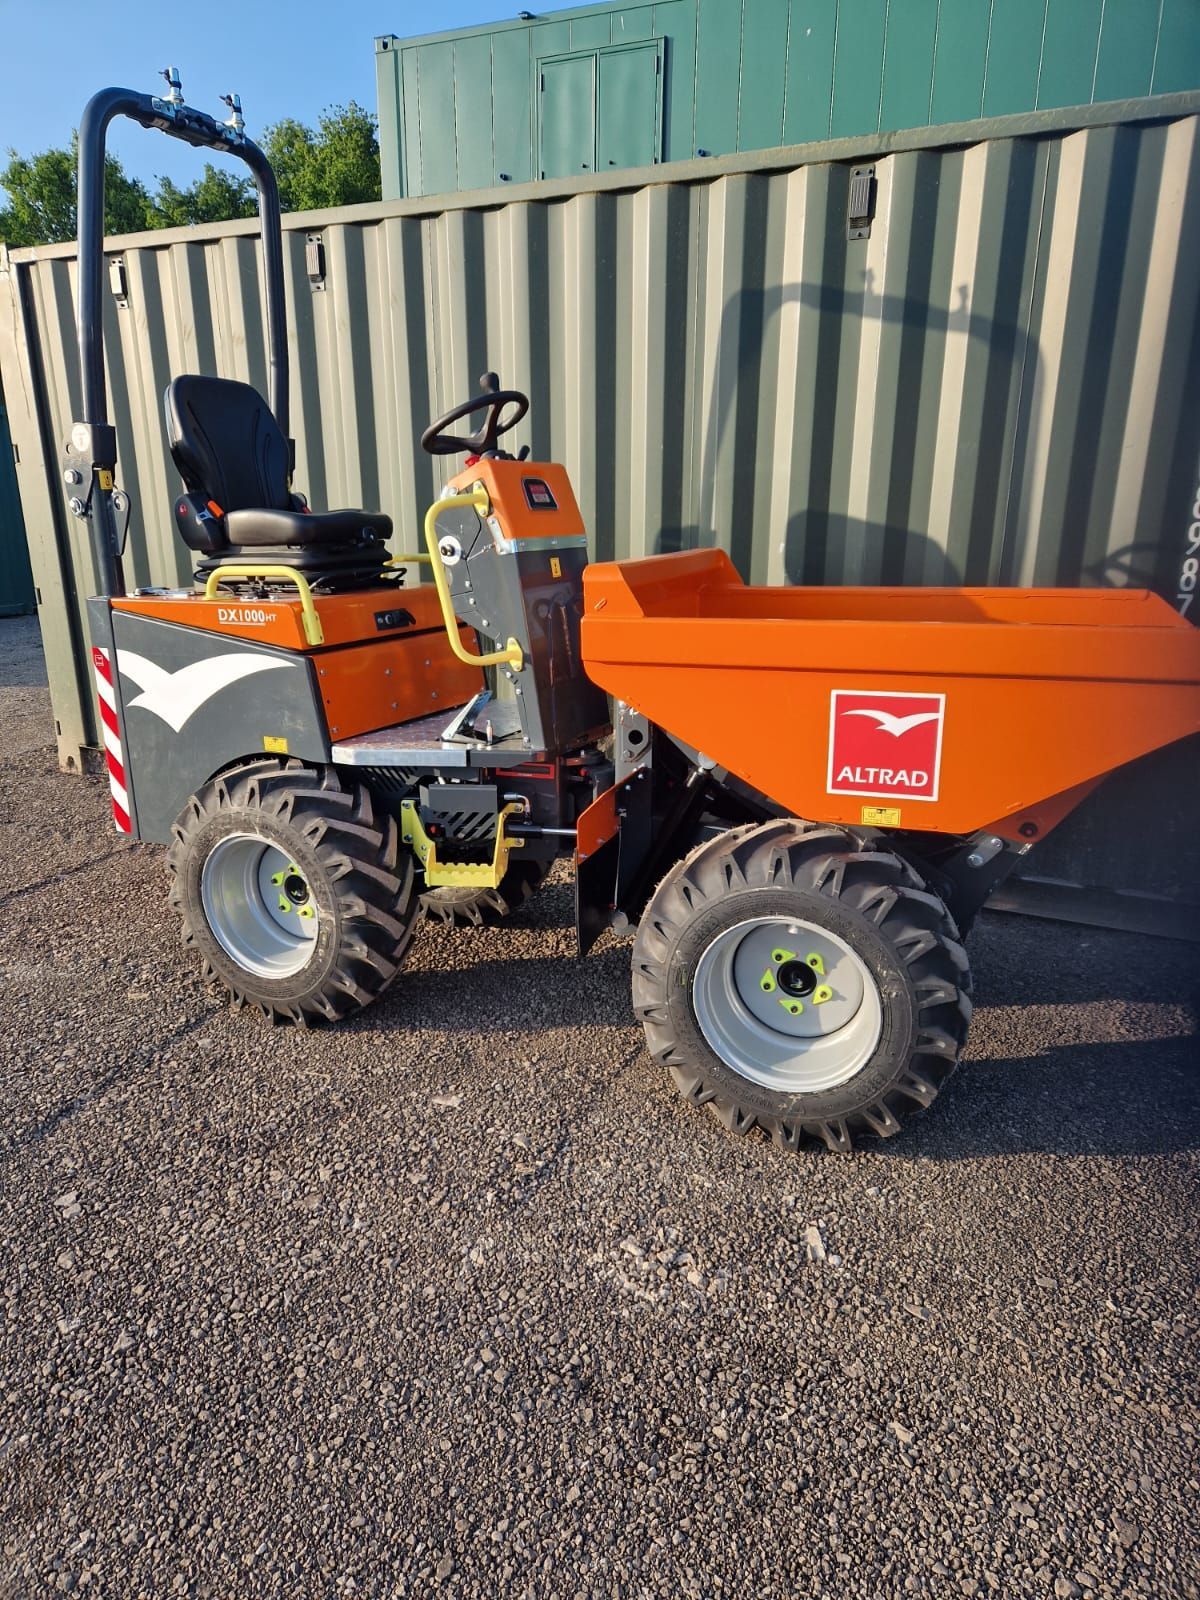 Affordable 1T Dumper To Hire In Boston